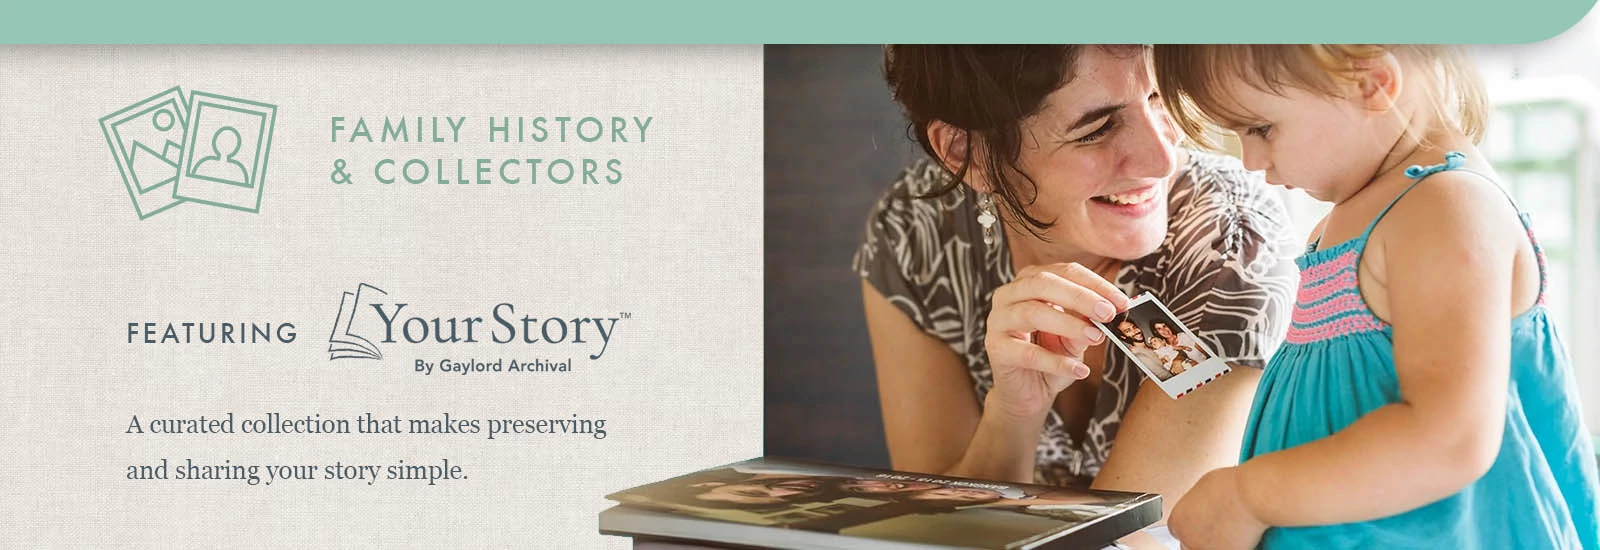 YourStory by Gaylord Archival: A curated collection of products and resources that make preserving and sharing your story simple!